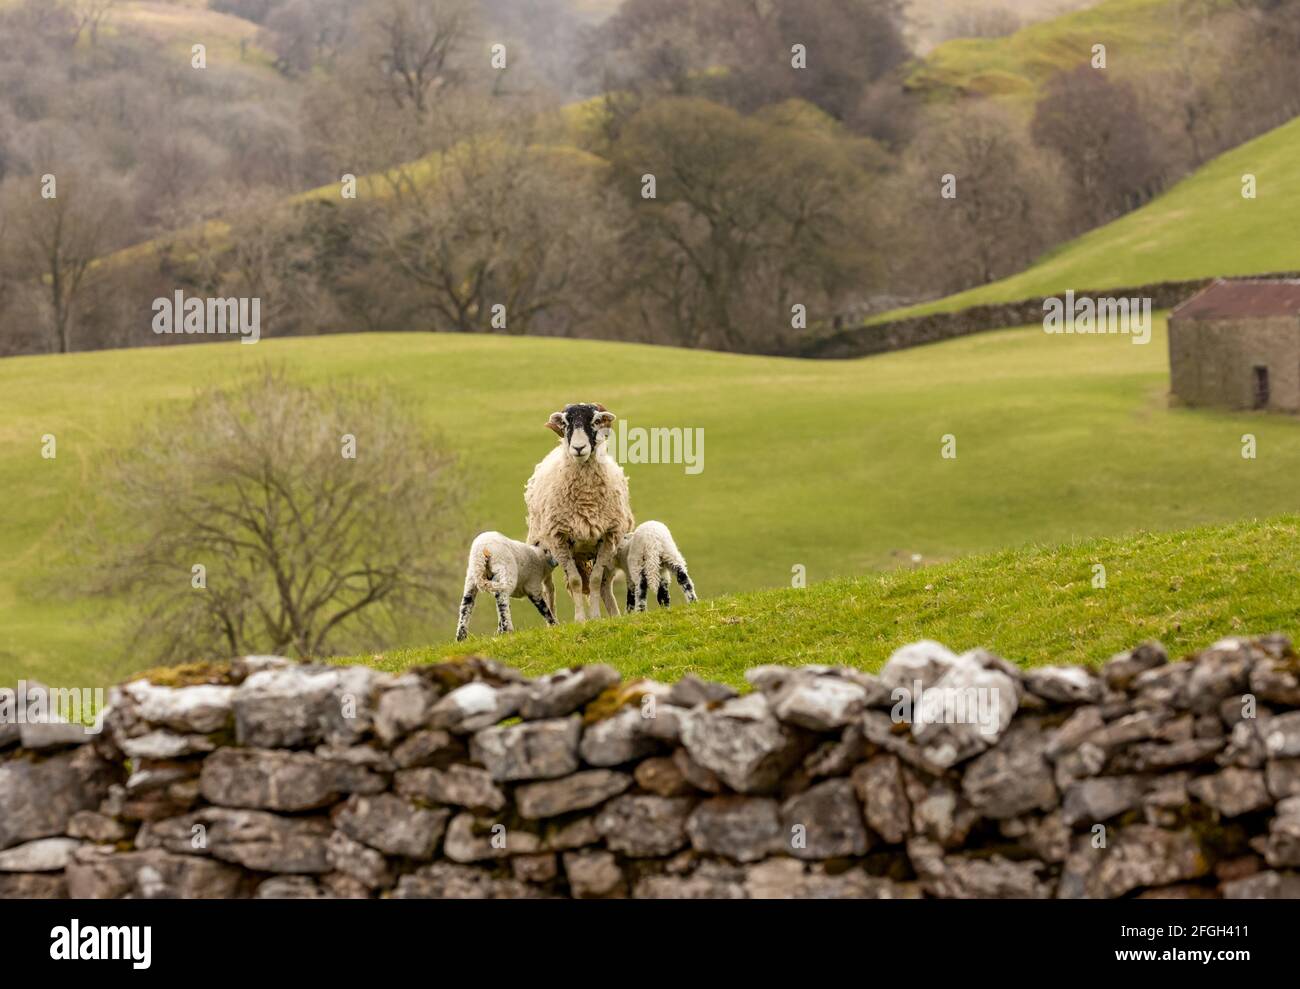 Lambing time in the Yorkshire Dales, UK, A typical rural scene in Springtime with a Swaledale ewe facing forward in green pastureland and two lambs su Stock Photo